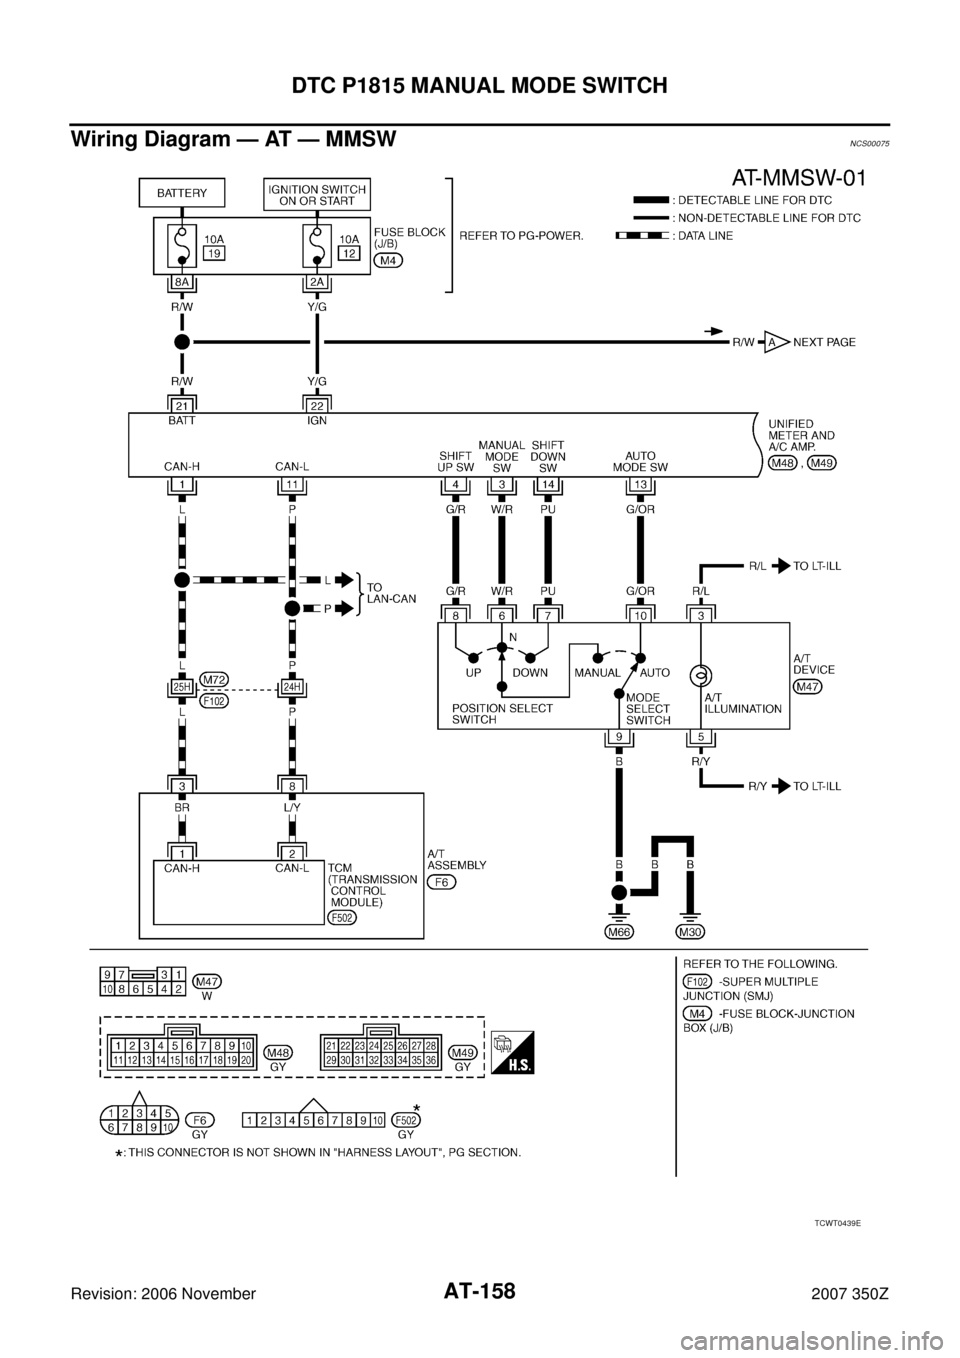 NISSAN 350Z 2007 Z33 Automatic Transmission Workshop Manual AT-158
DTC P1815 MANUAL MODE SWITCH
Revision: 2006 November2007 350Z
Wiring Diagram — AT — MMSWNCS00075
TCWT0439E 